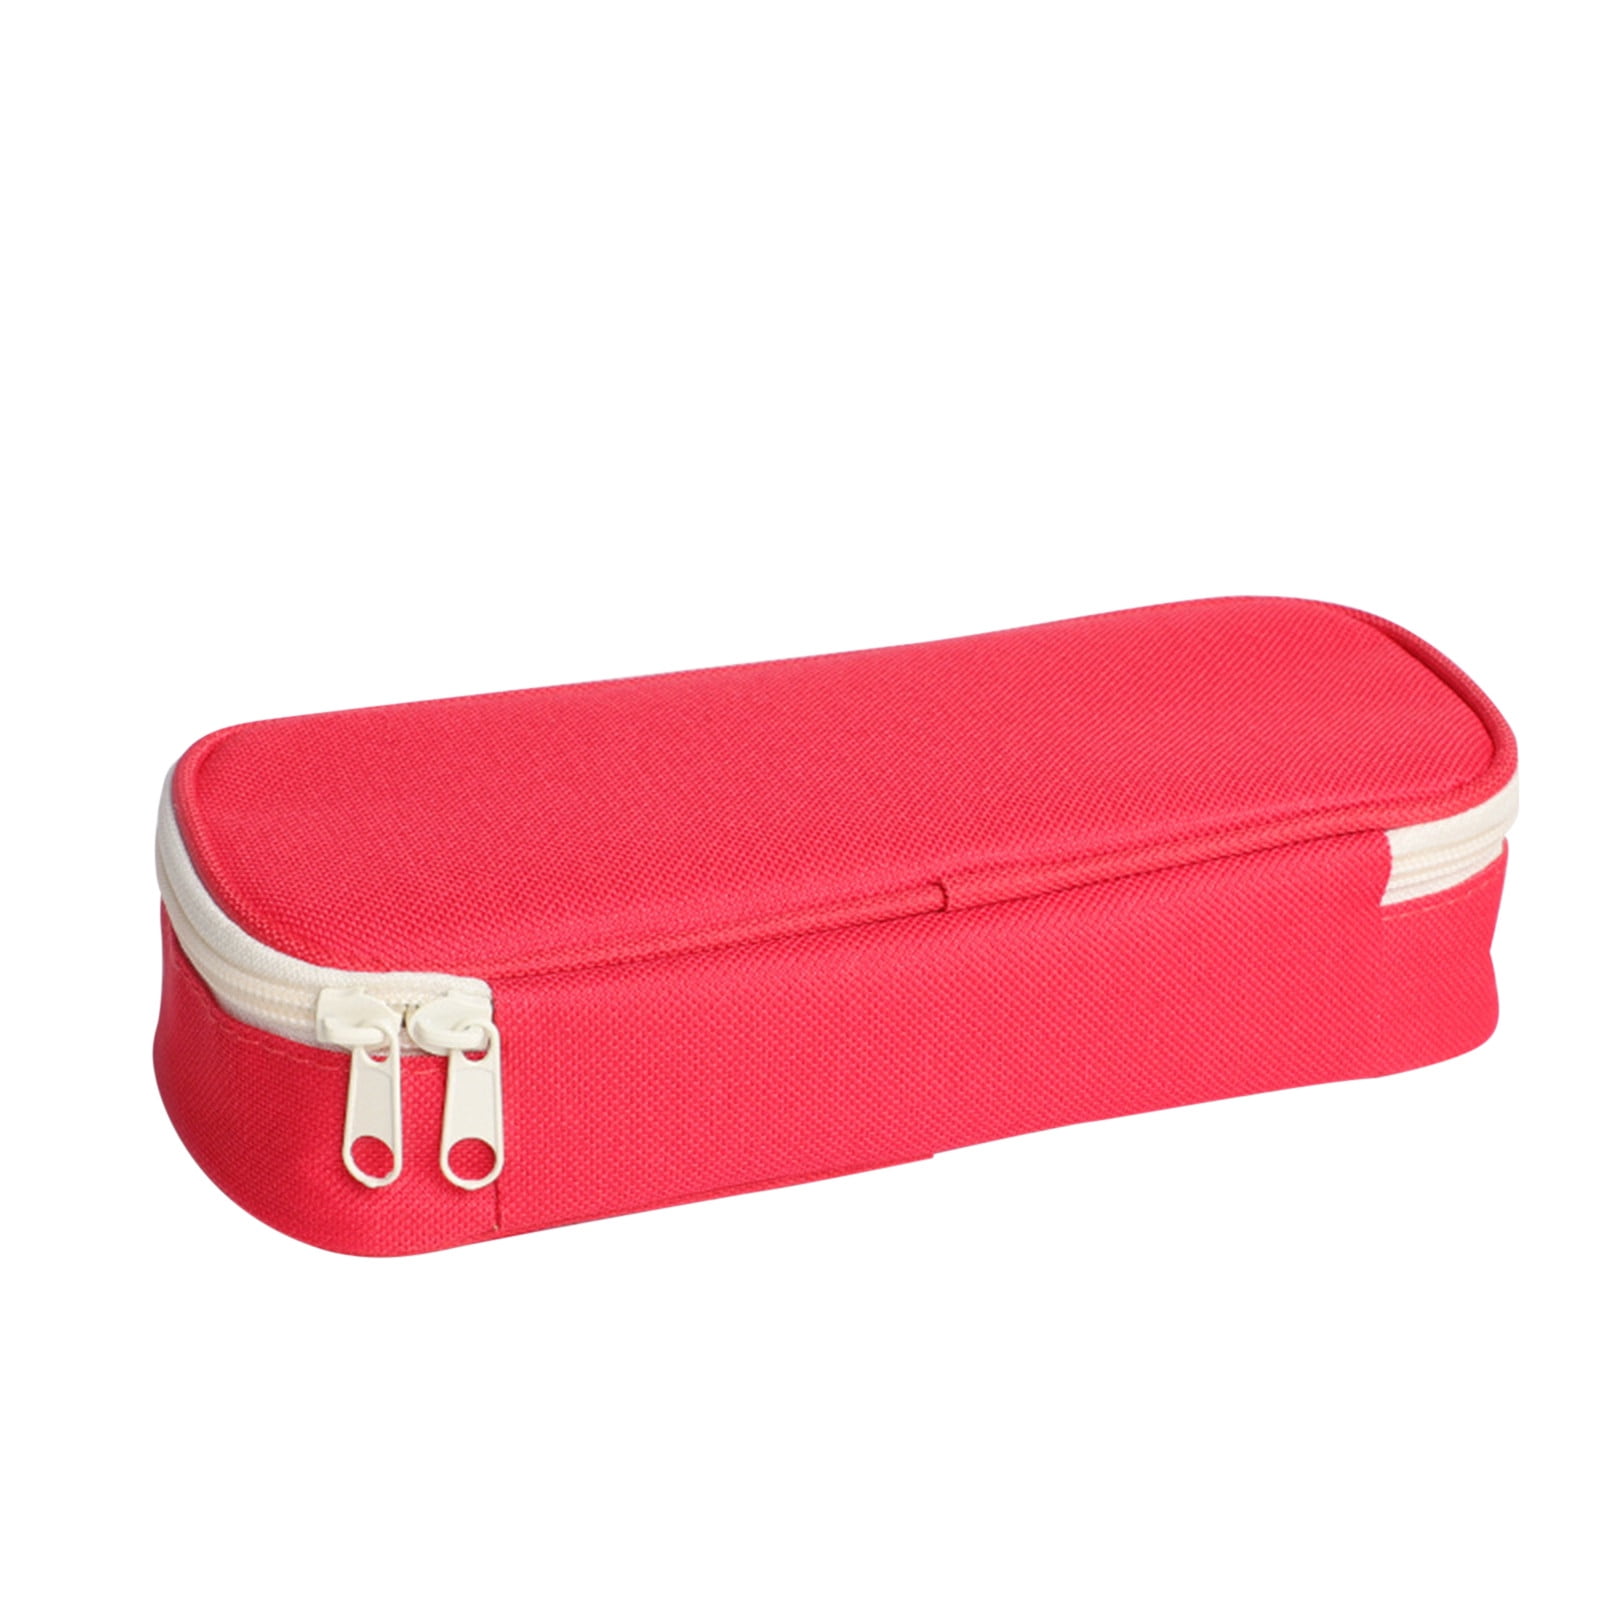 Cool Pencil Case - Red Pencil Pouch Gaming Kawaii Pencil Pouch Colored  Pencil Case for Teen Girls Adults Kids Students Teachers